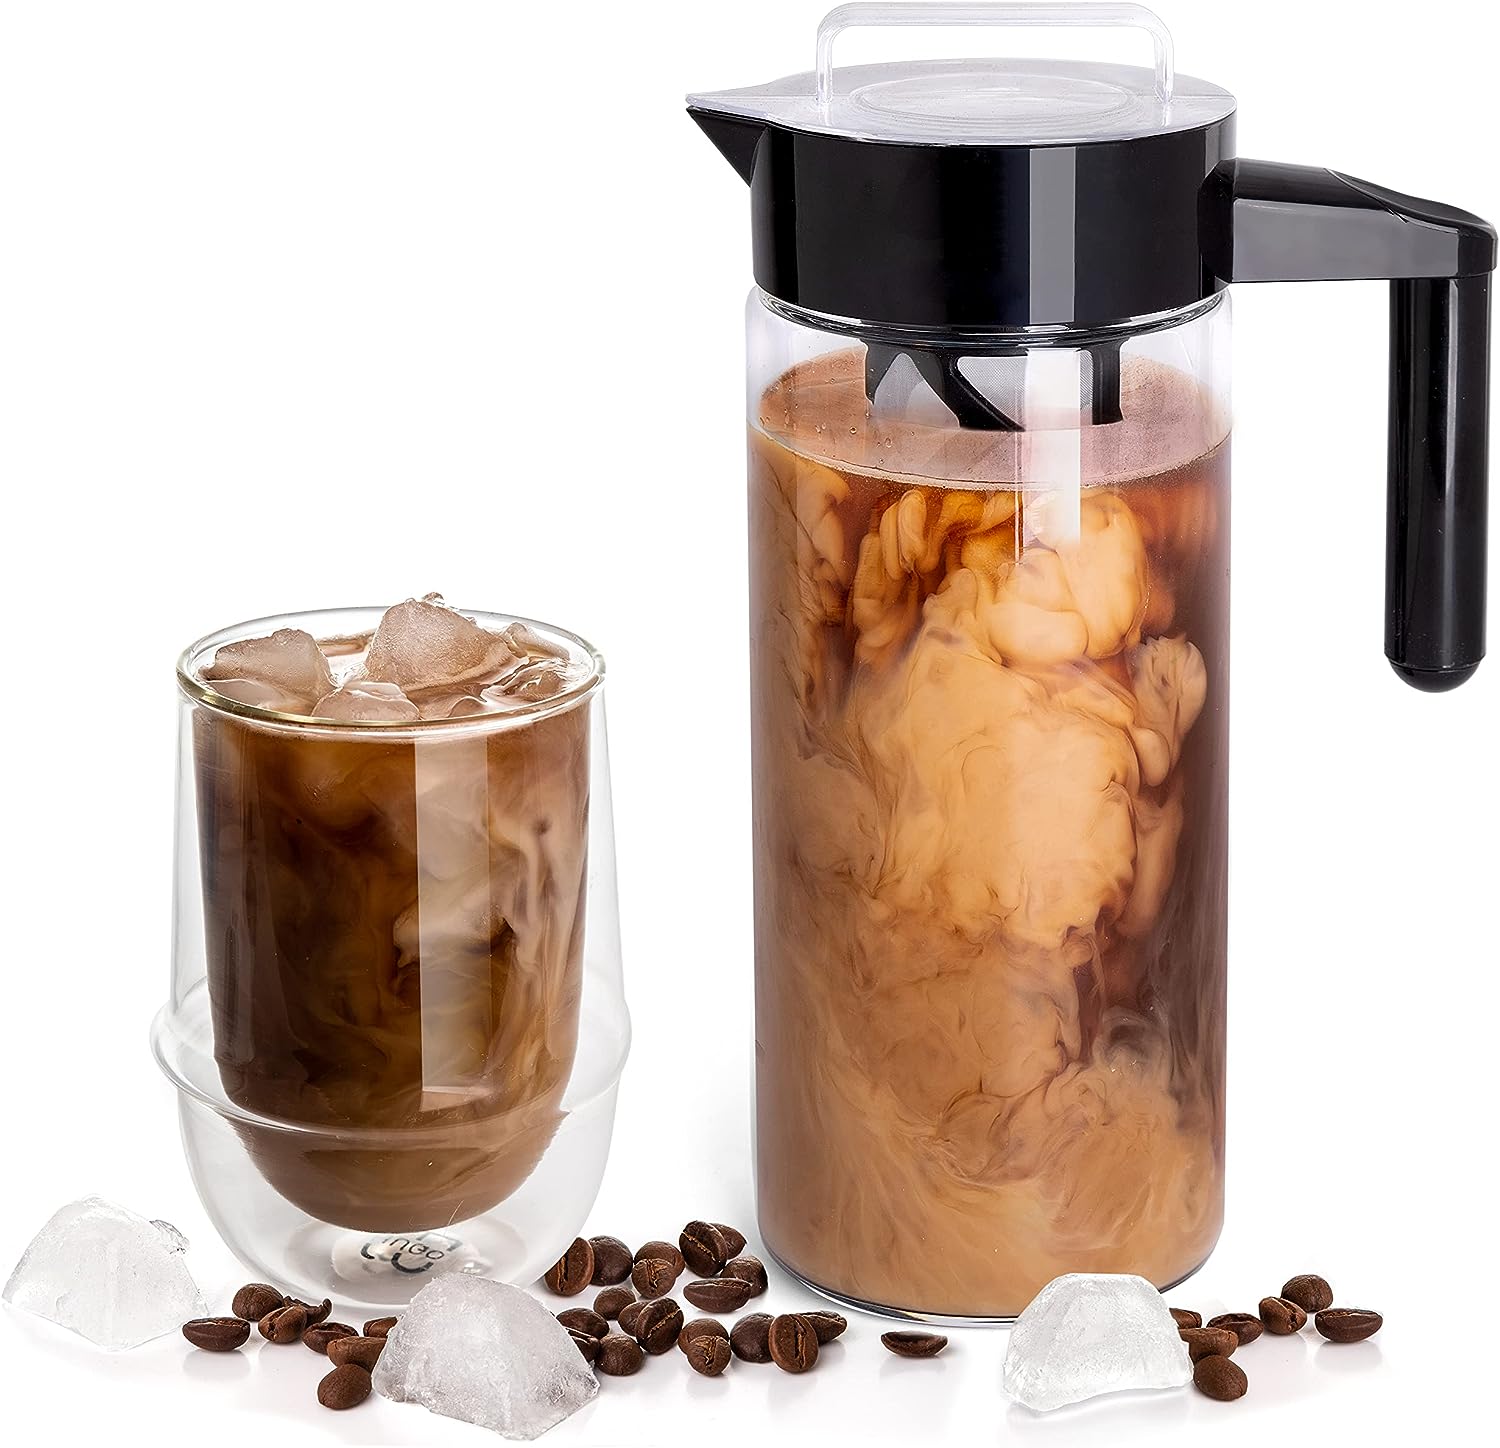 Mixpresso Cold Brew Maker For Iced Coffee Review